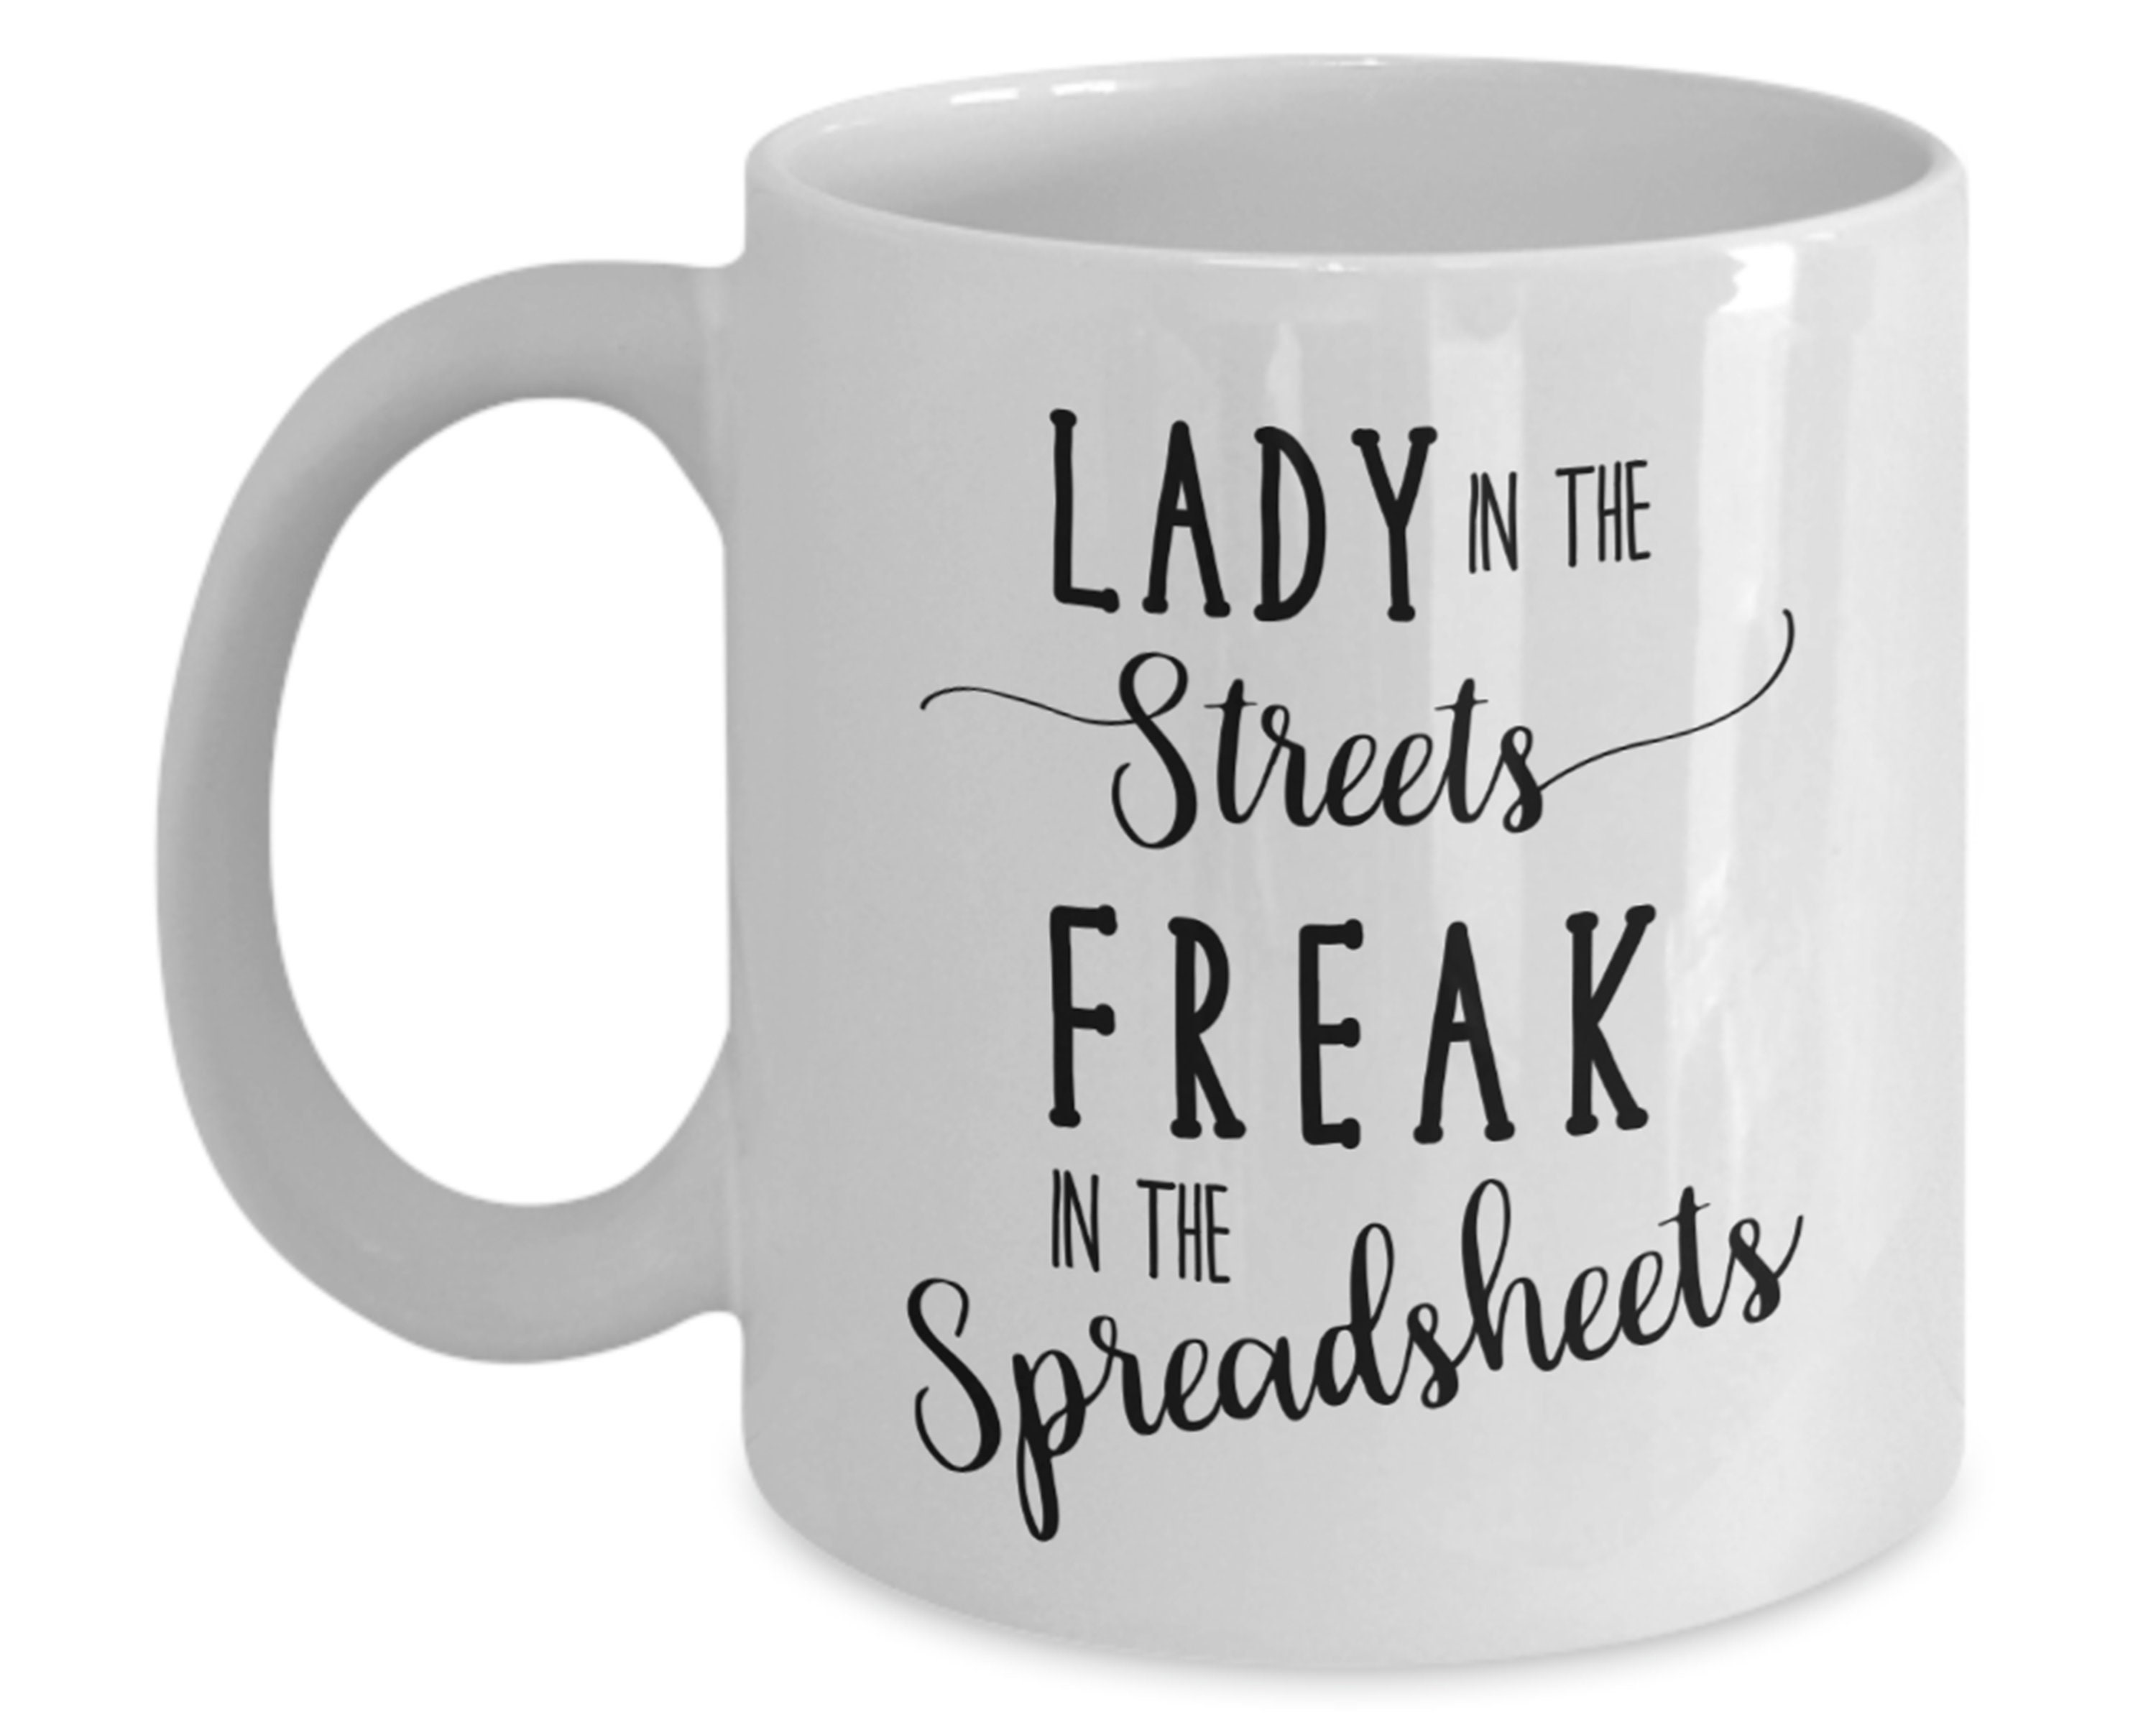 Accountant/CPA mug Lady in the Streets Freak in the Spreadsheets